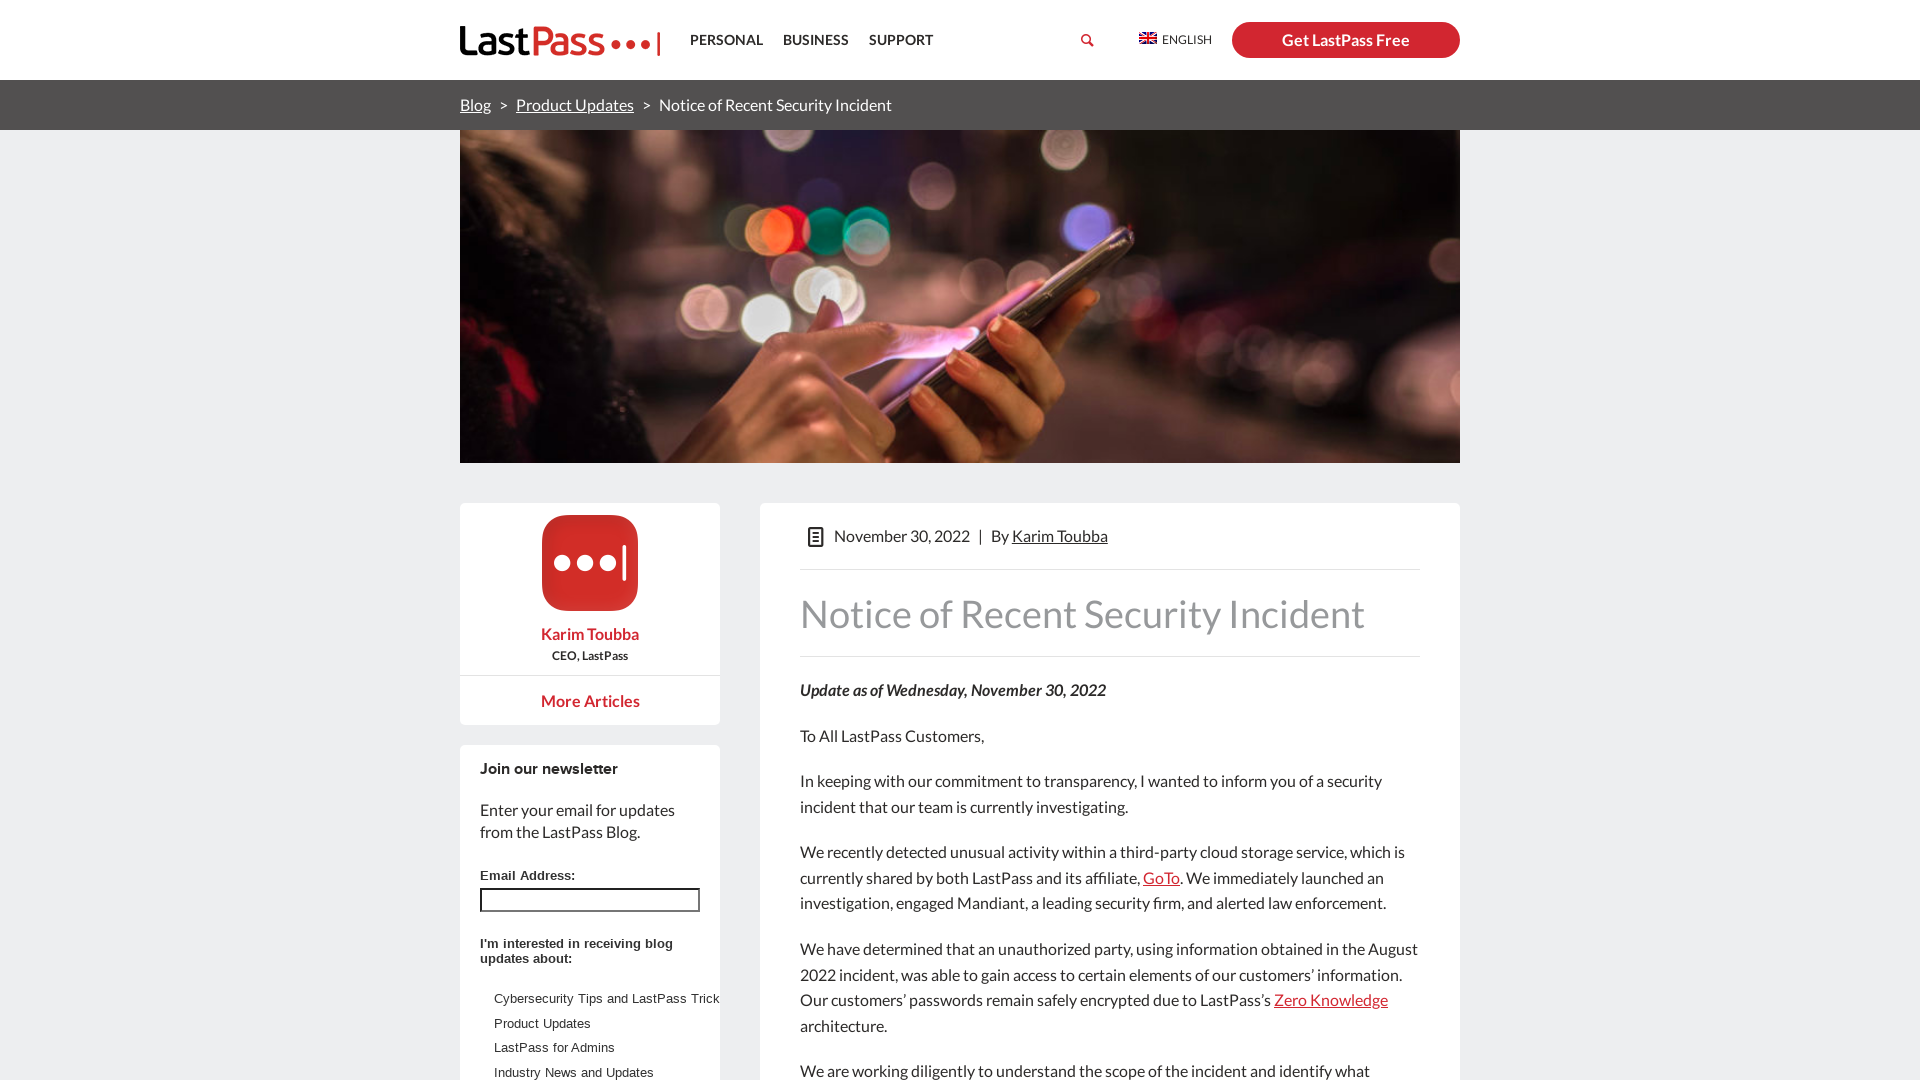 Notice of Recent Security Incident - The LastPass Blog